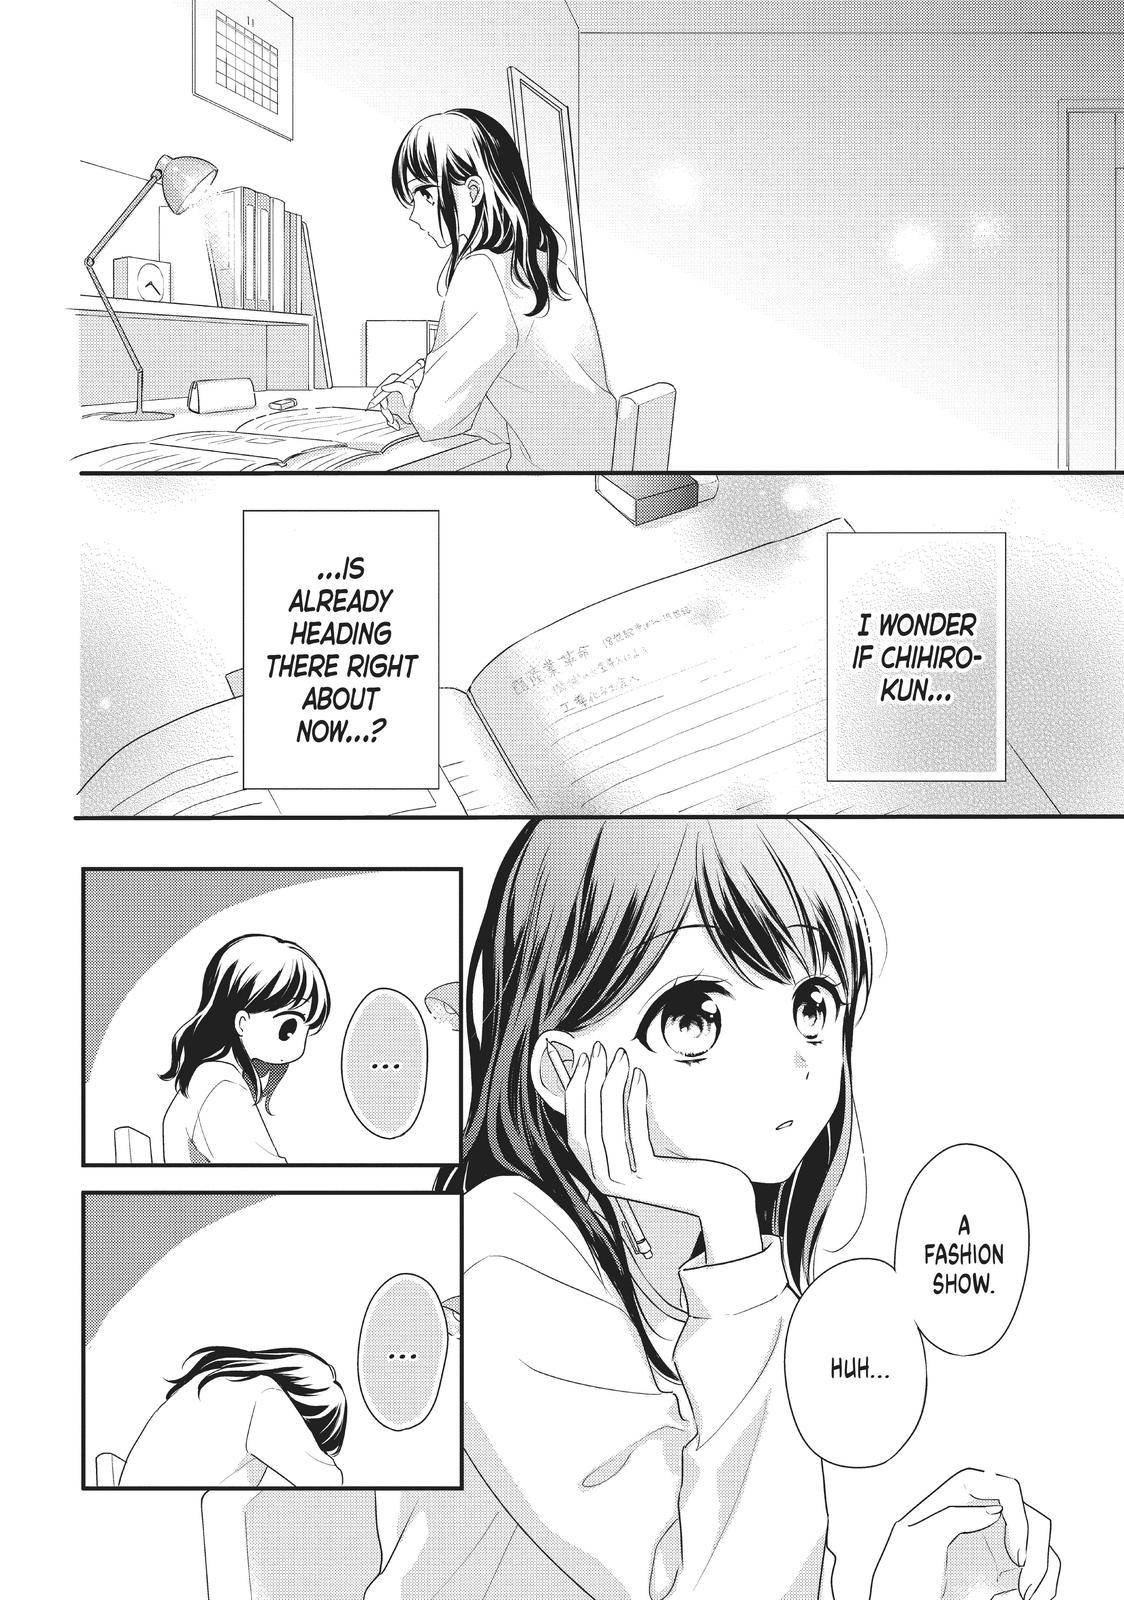 Chihiro-kun Only Has Eyes for Me - chapter 15 - #6